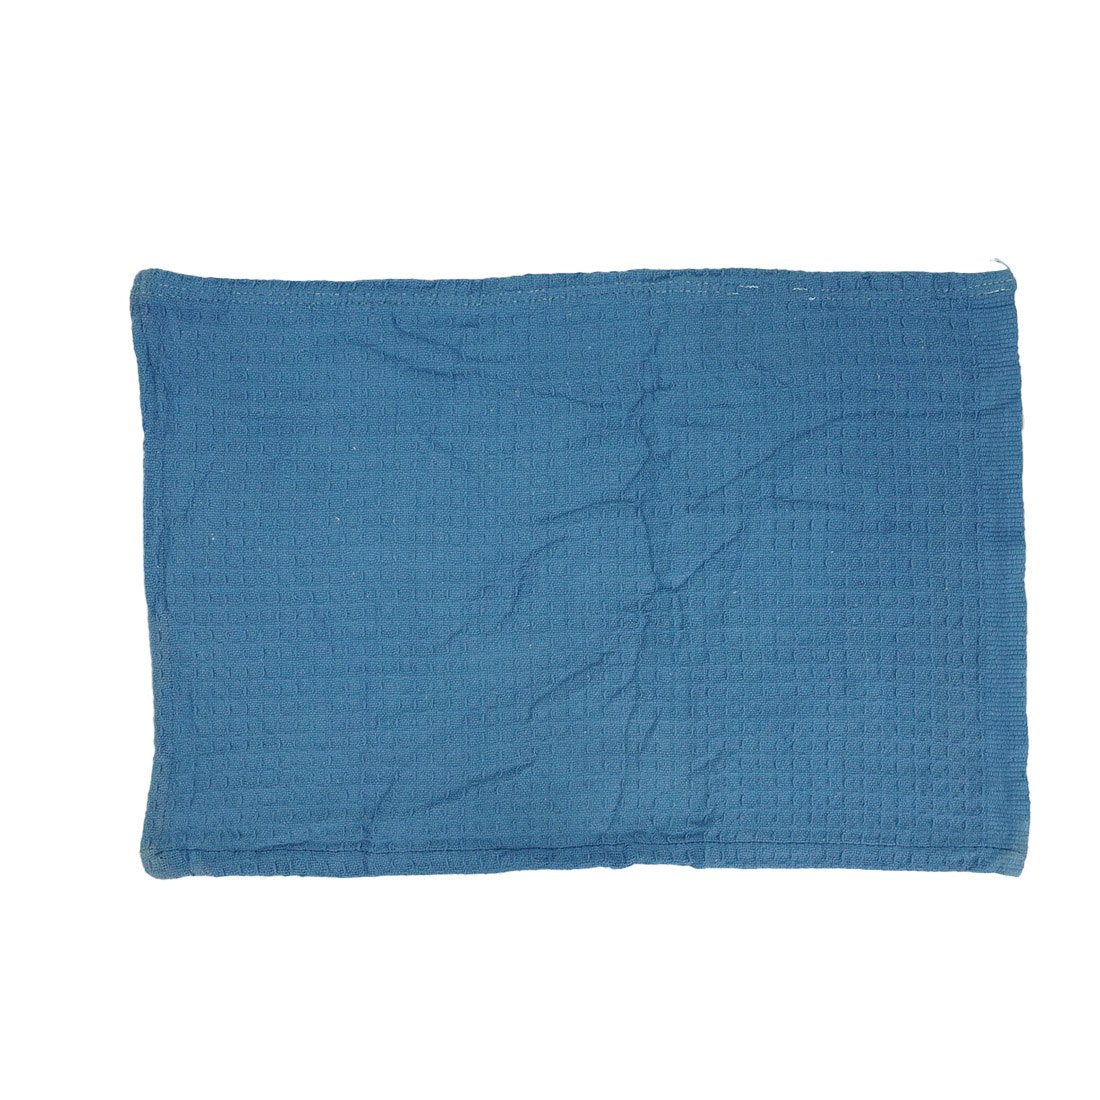 Recycled Surgical Towels Mixed Blue View